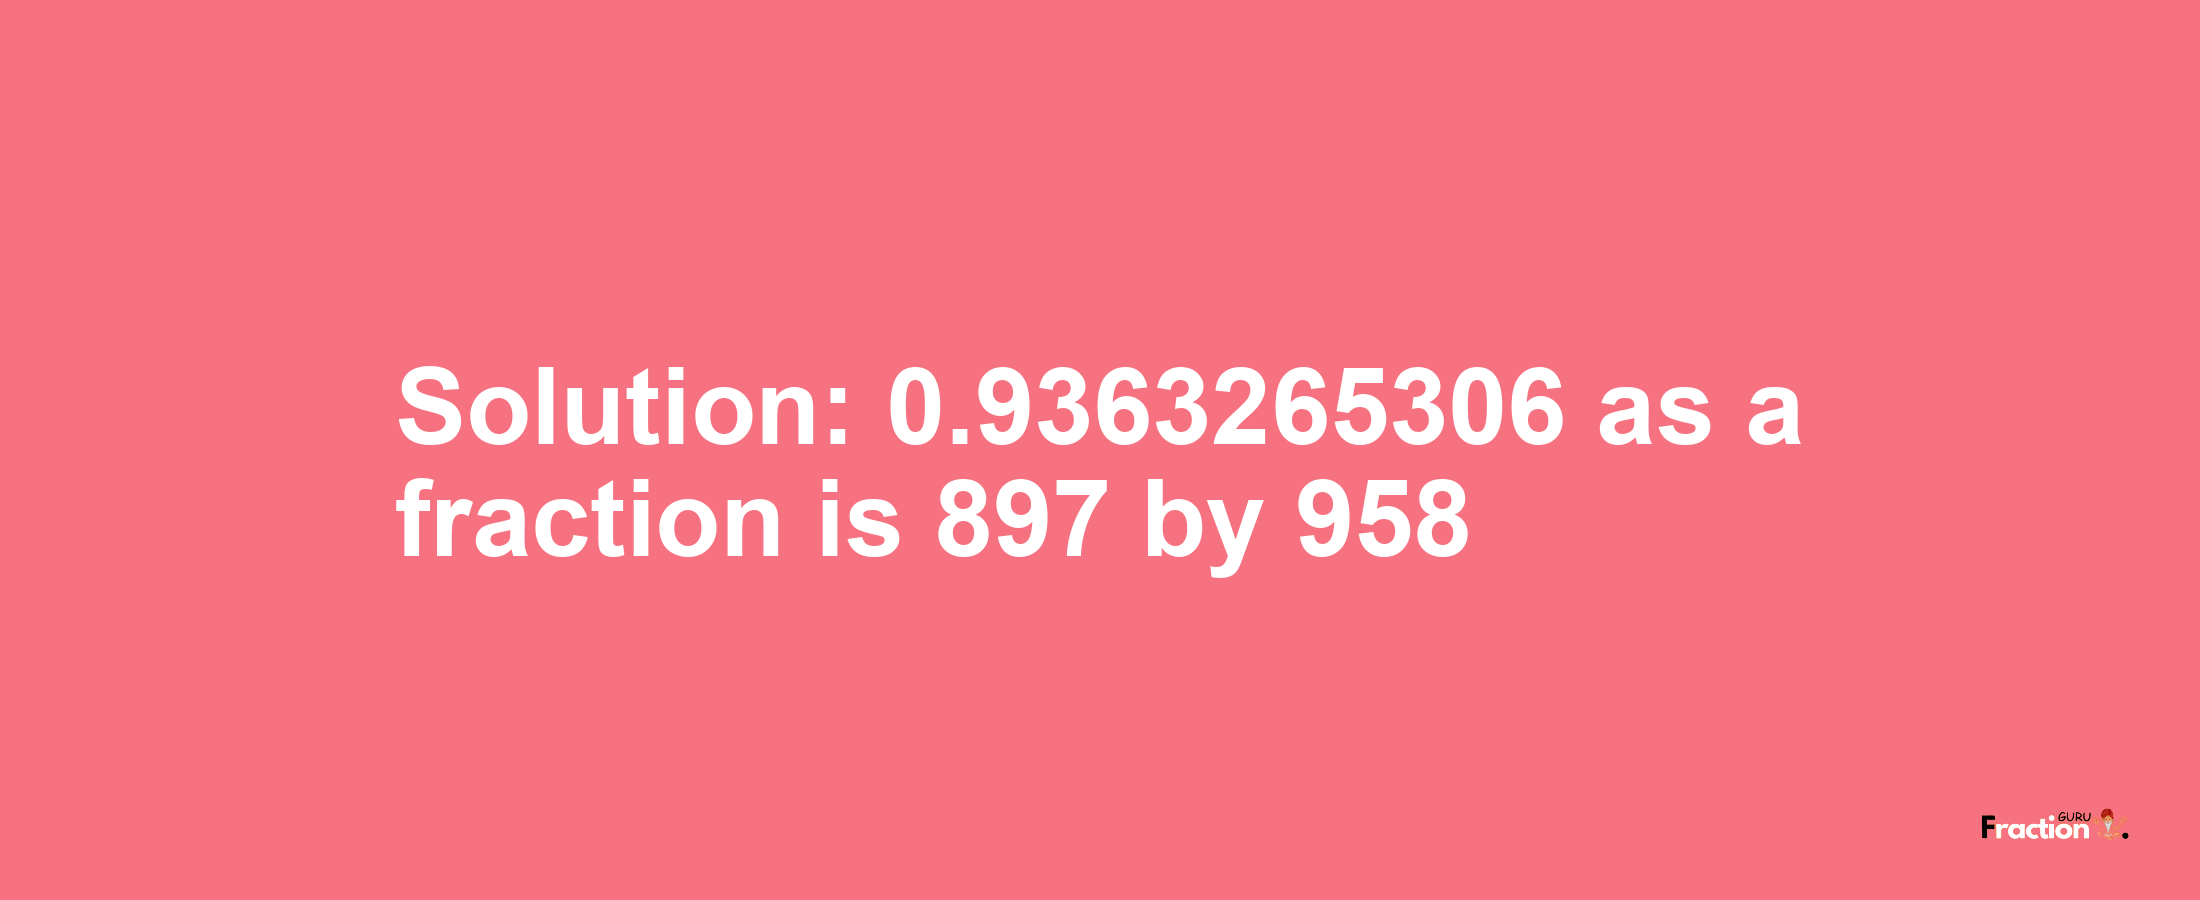 Solution:0.9363265306 as a fraction is 897/958